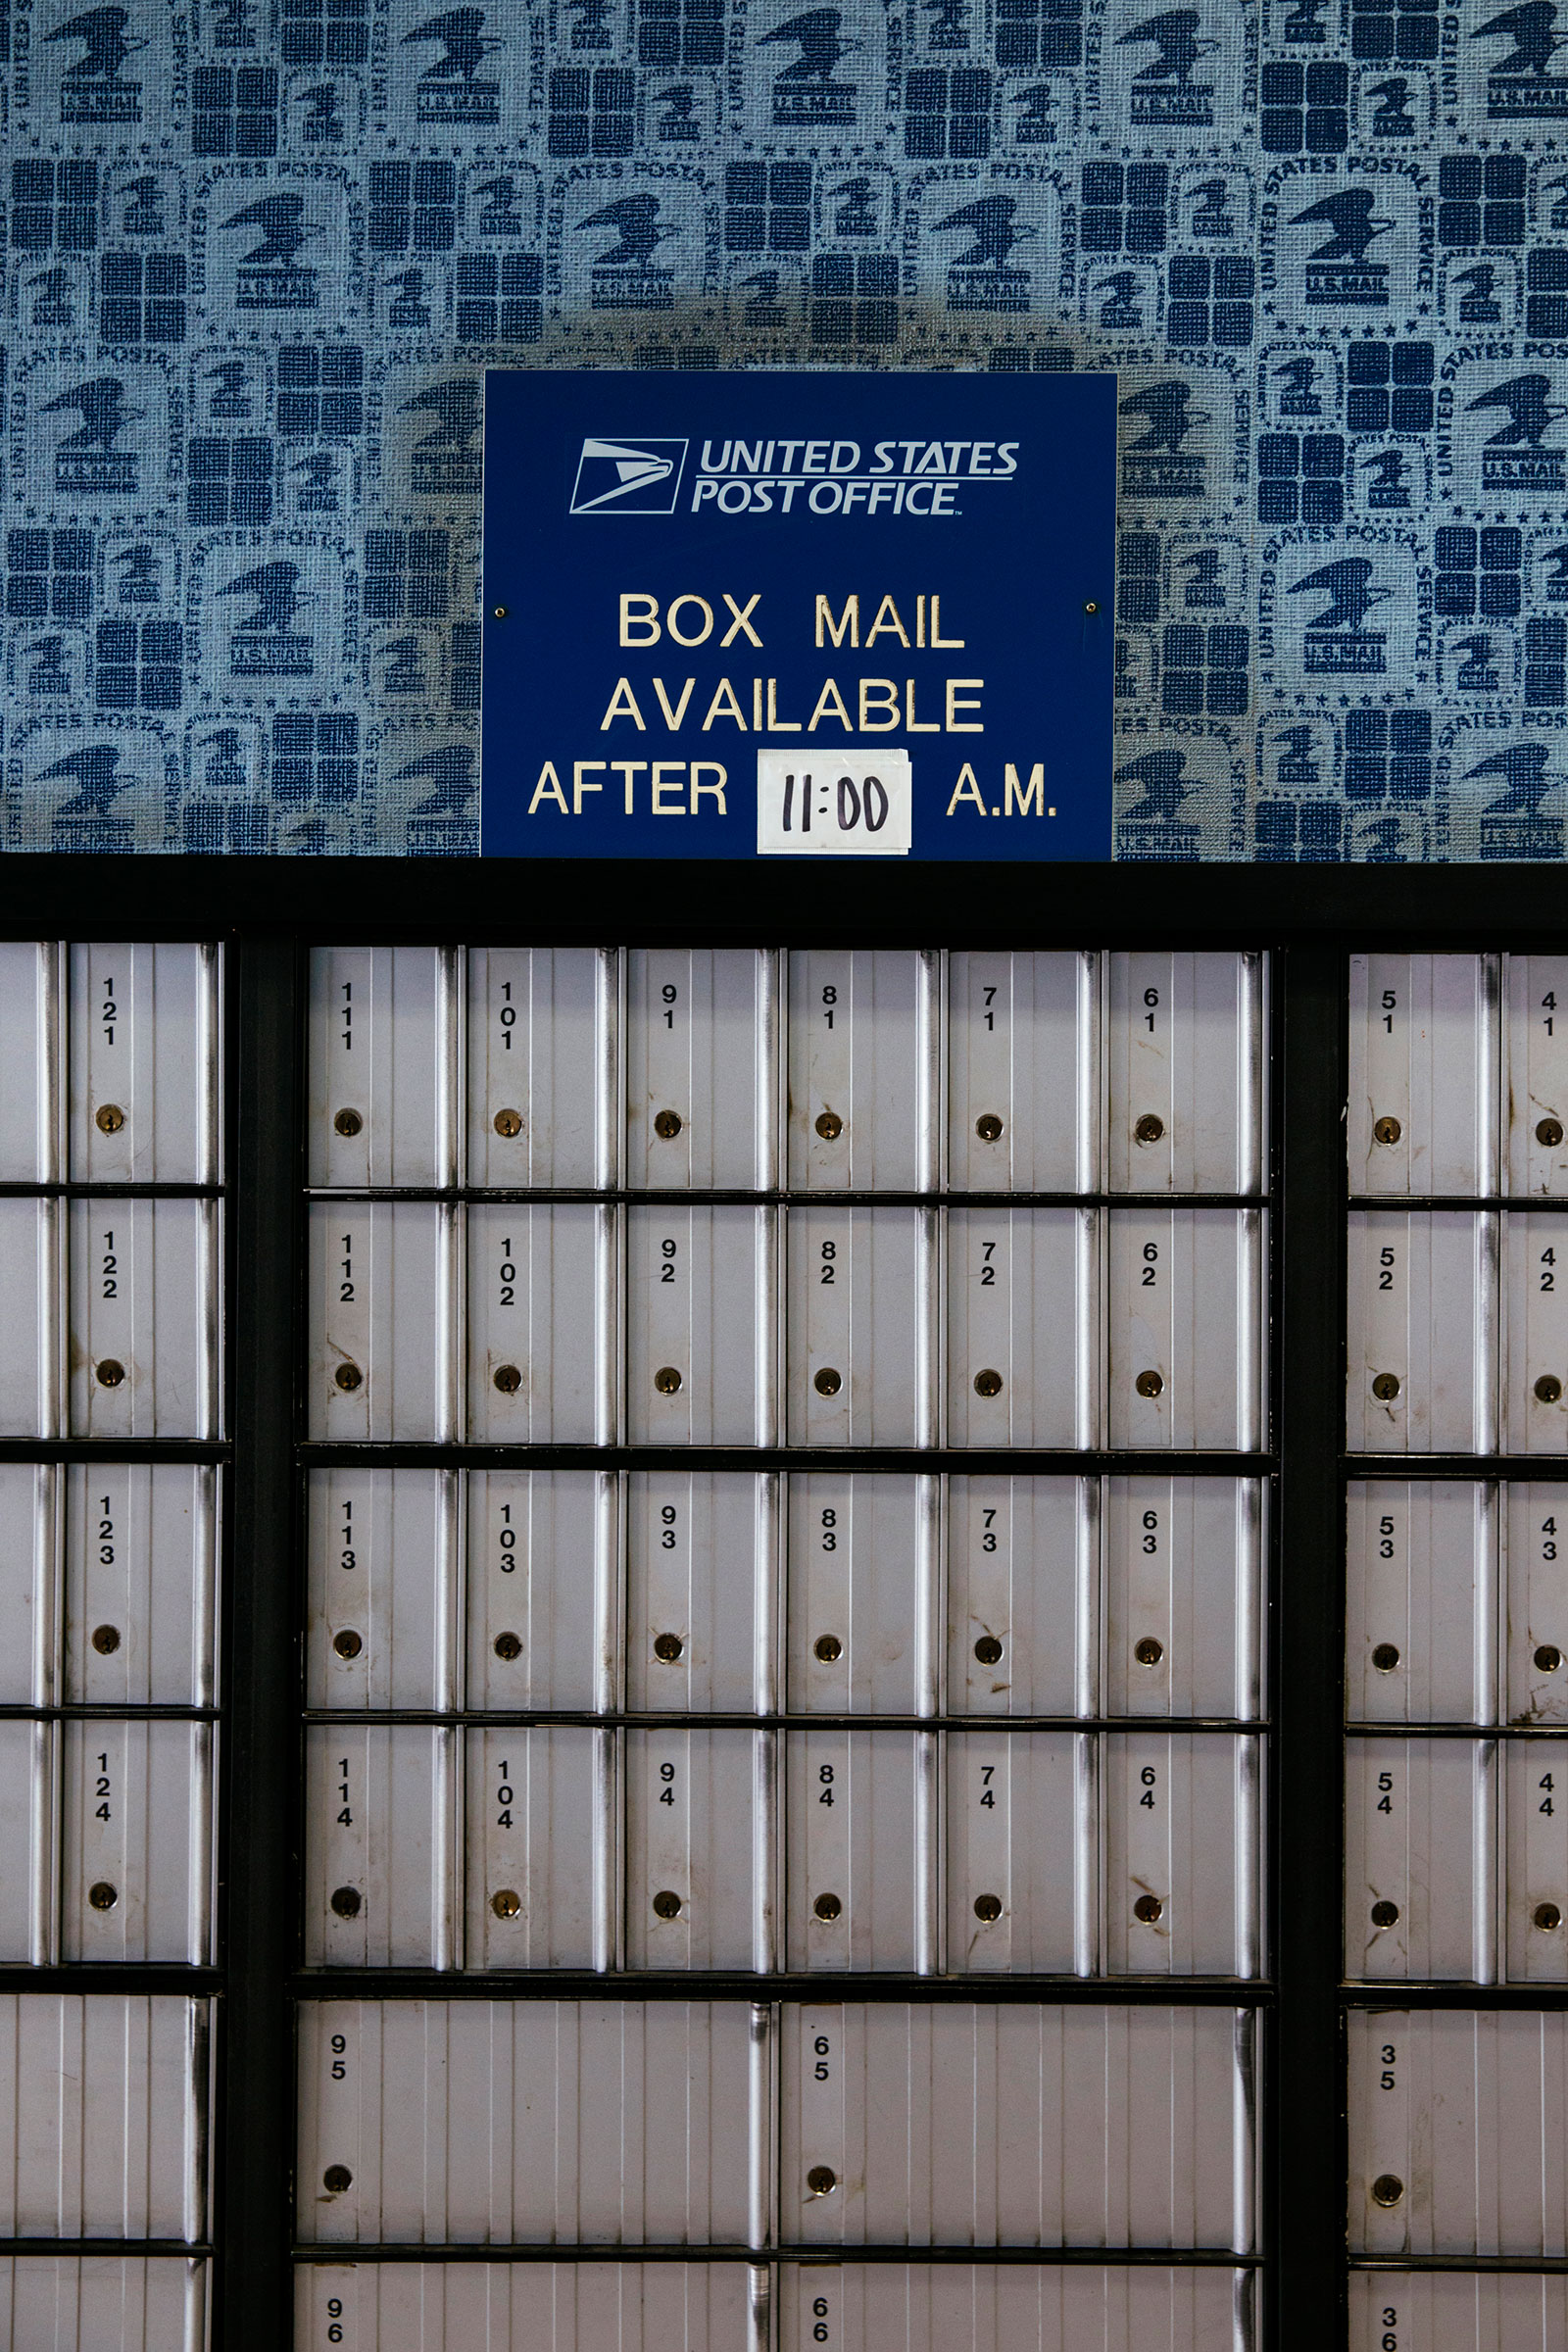 Mailboxes in the Comer Georgia Post Office in Comer, Georgia February 3, 2023. United States Postmaster General Louis DeJoy plans to modernize the outdated postal system.Photo by Kendrick Brinson